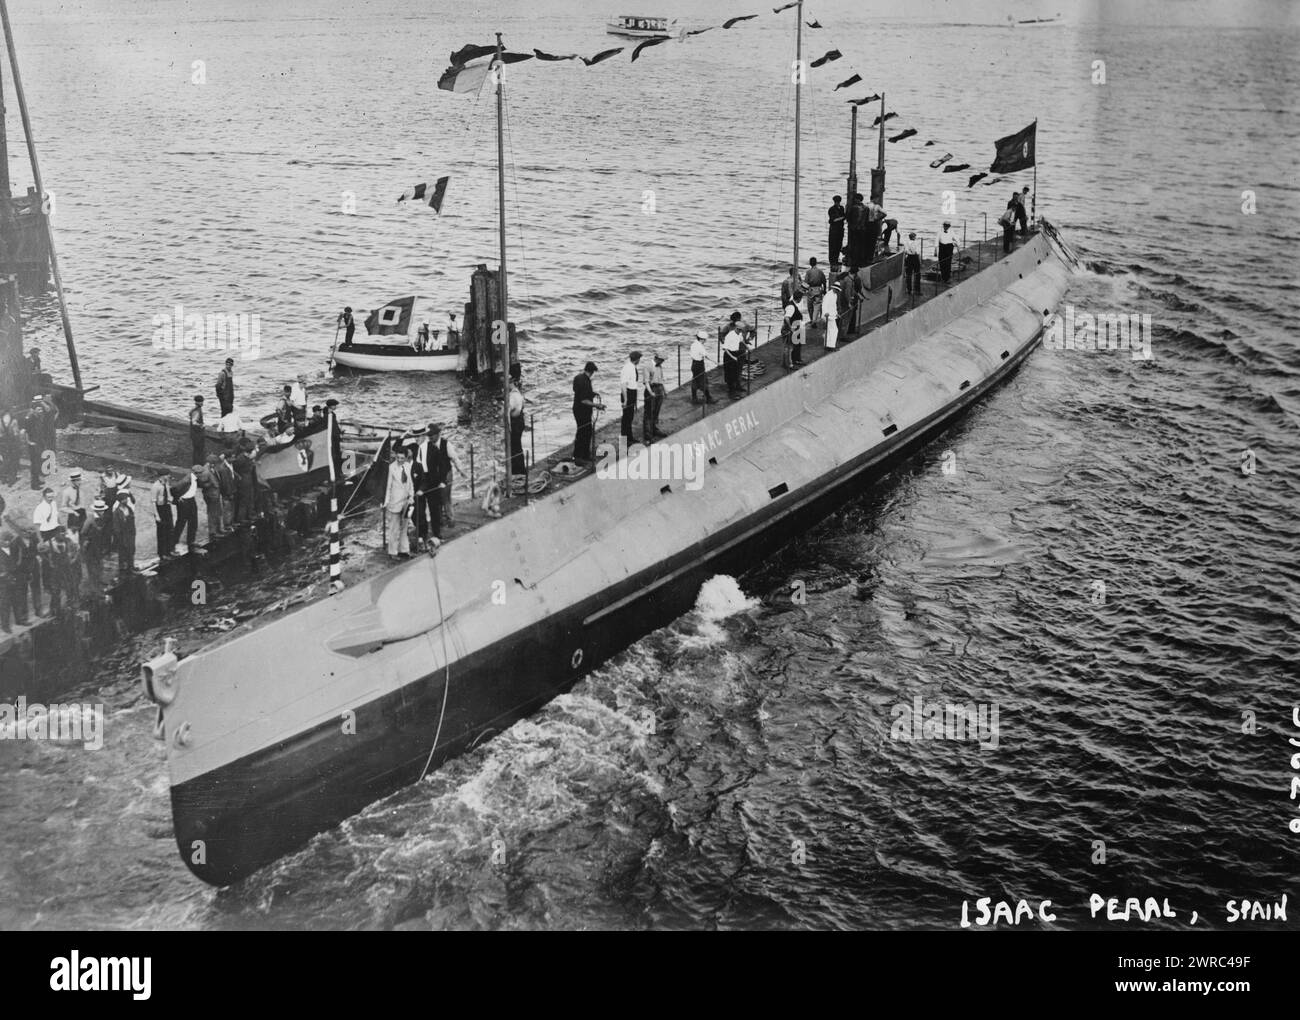 ISAAC PERAL, Spain, Photograph shows the Isaac Peral, a 200' long submarine built at th Fore River shipyard in Quincy, Massachusetts, for the Spanish Navy. Launching took place on July 22, 1916., 1916, Glass negatives, 1 negative: glass Stock Photo